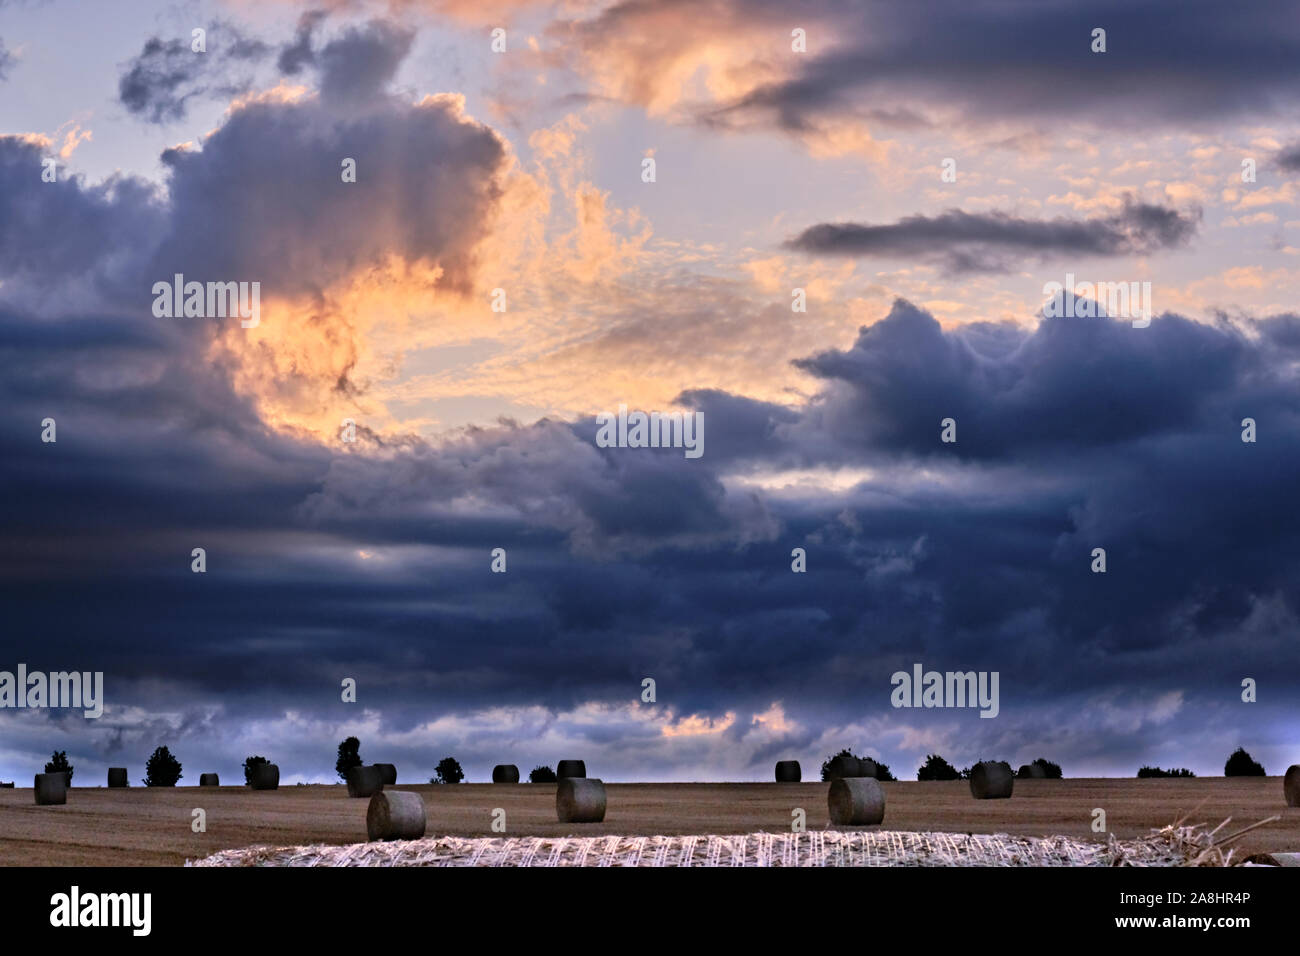 Storm clouds gathering on the horizon over bales of hay Stock Photo